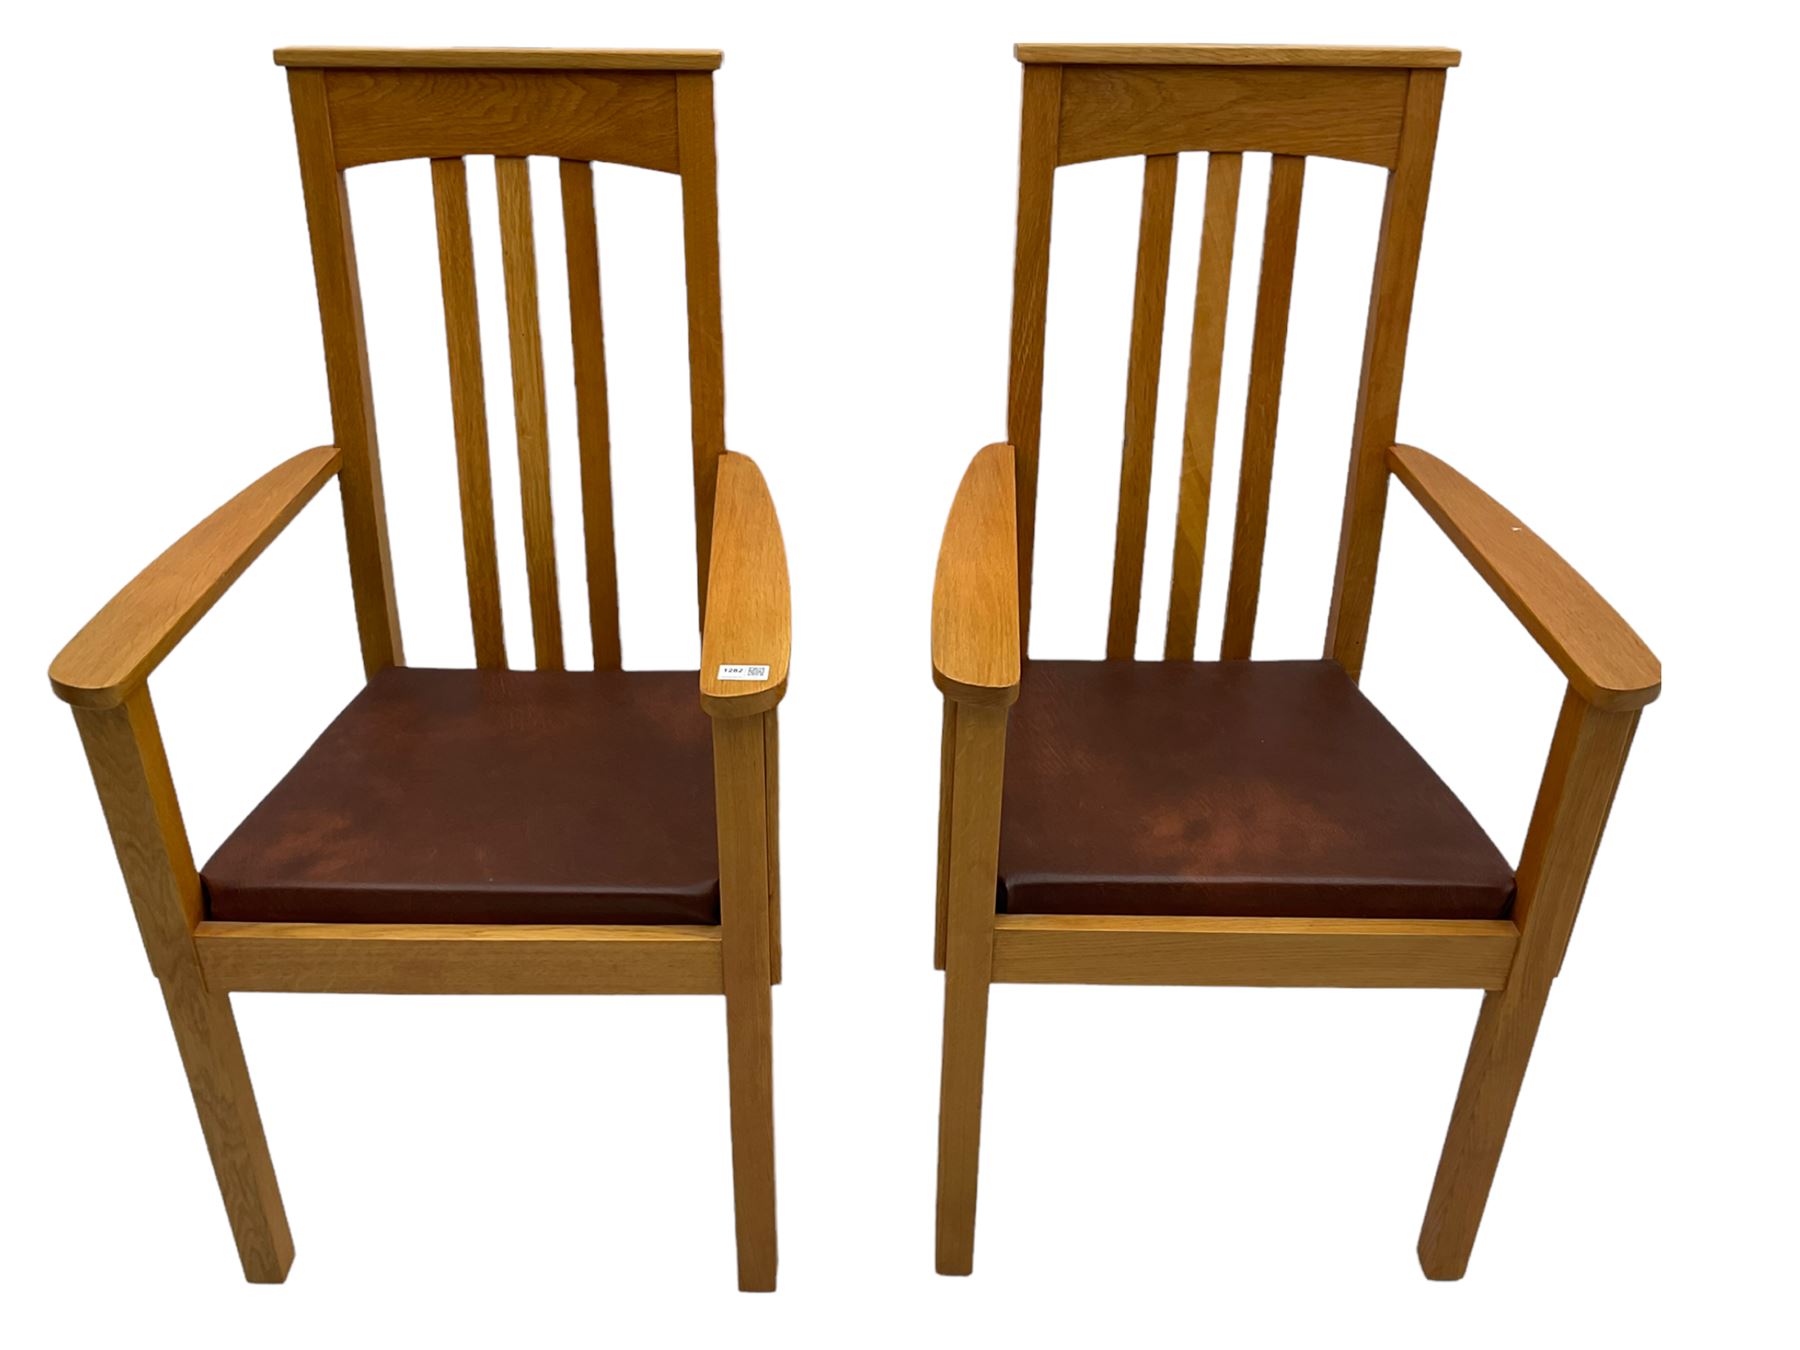 Pair of solid oak Arts and Crafts style carver chairs - Image 2 of 4